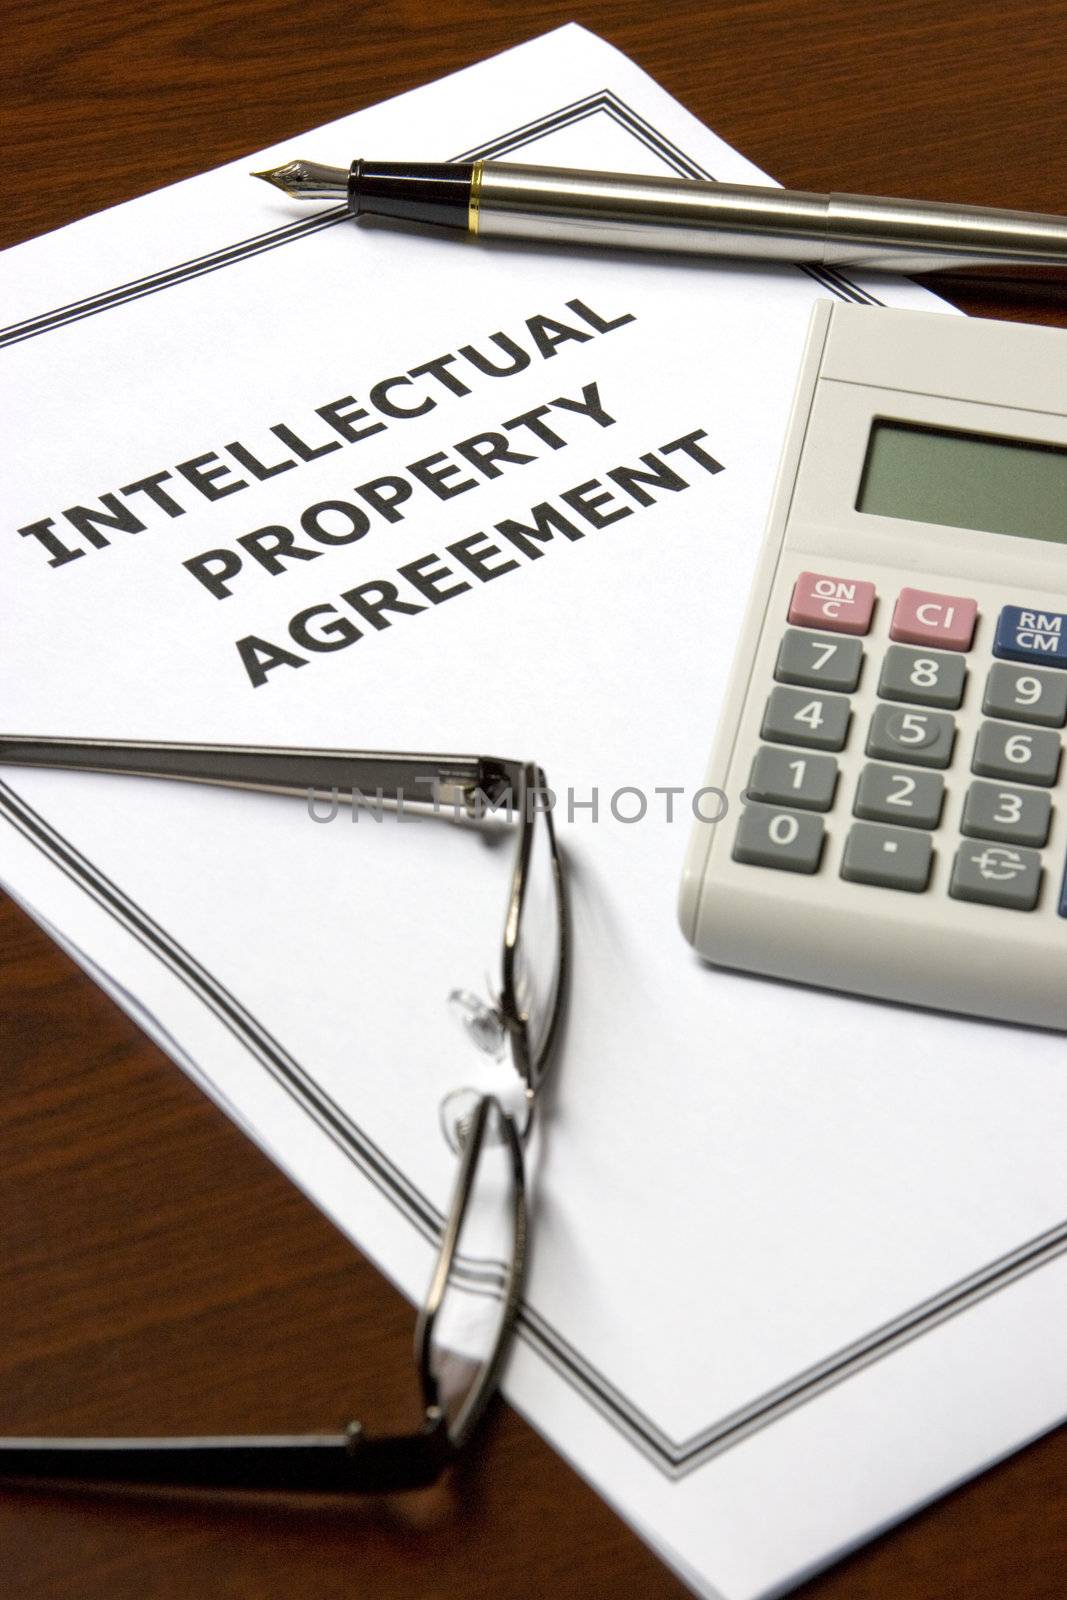 Image of an intellectual property agreement on an office table.